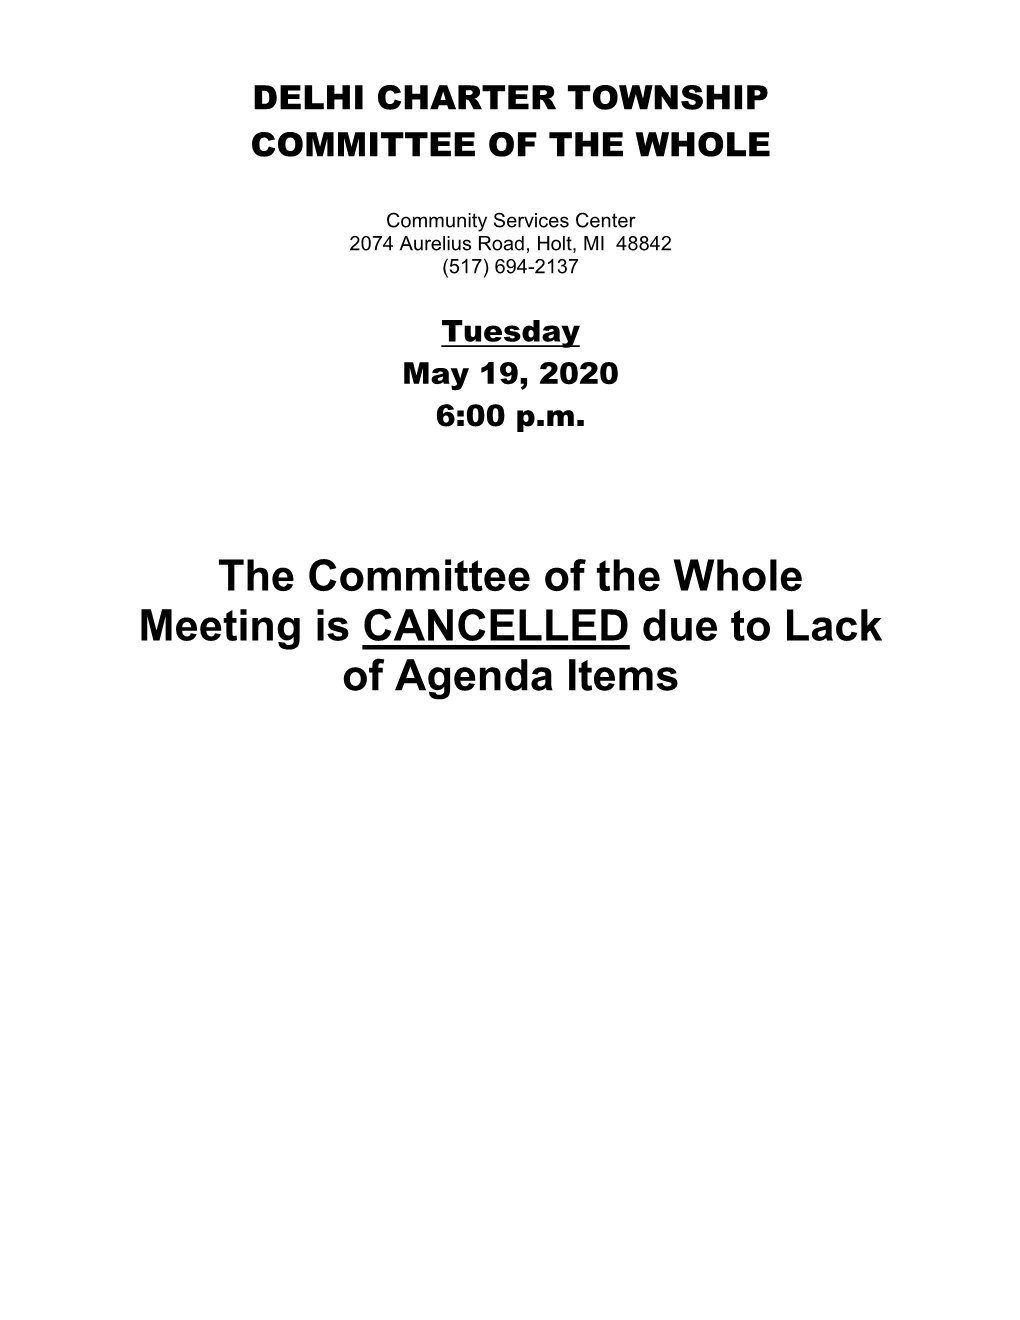 The Committee of the Whole Meeting Is CANCELLED Due to Lack of Agenda Items